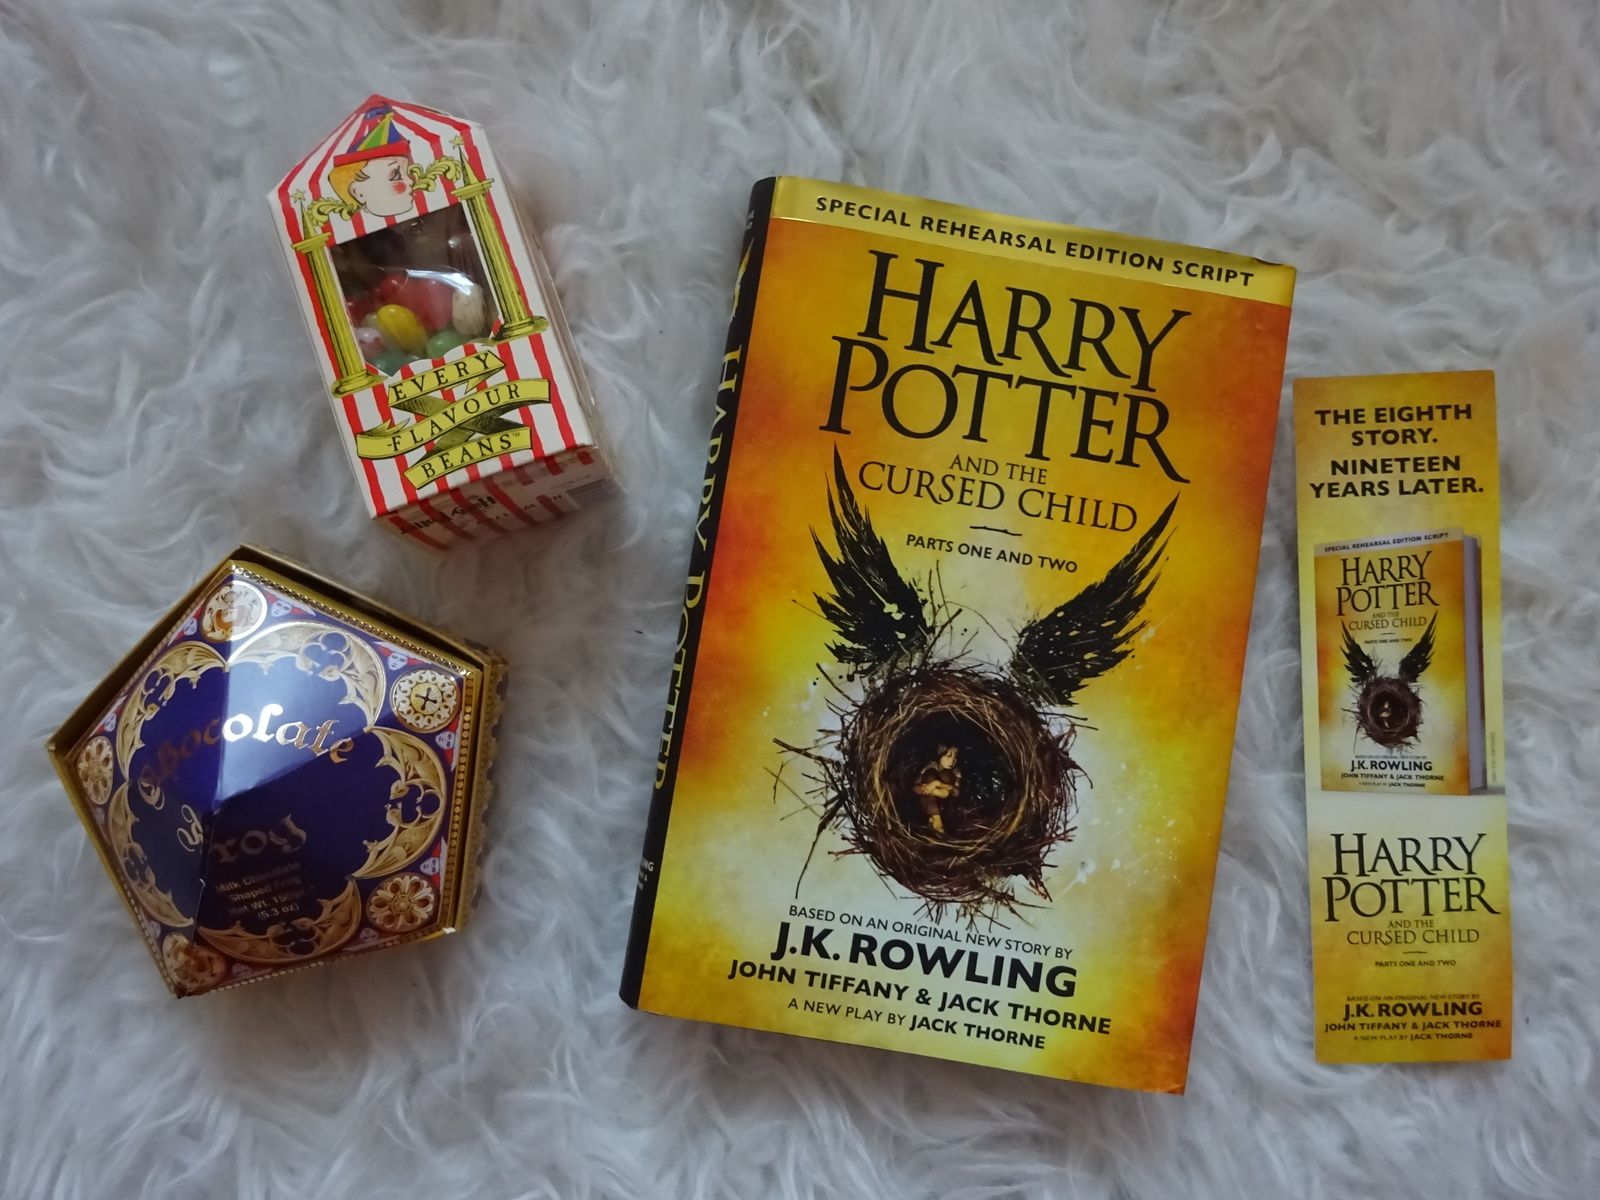 Buchbewertung: 'Harry Potter and the cursed child'